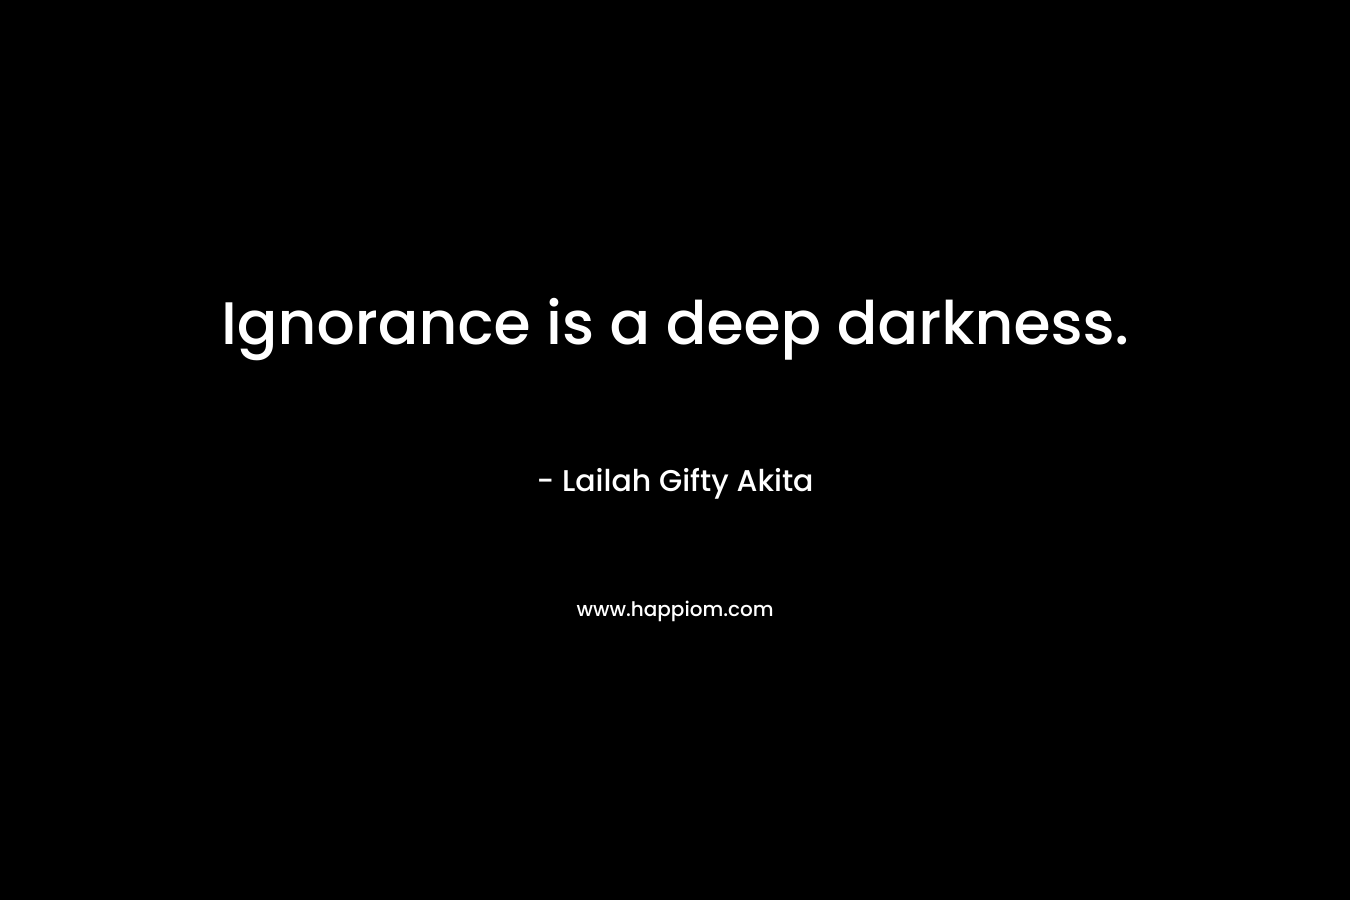 Ignorance is a deep darkness.